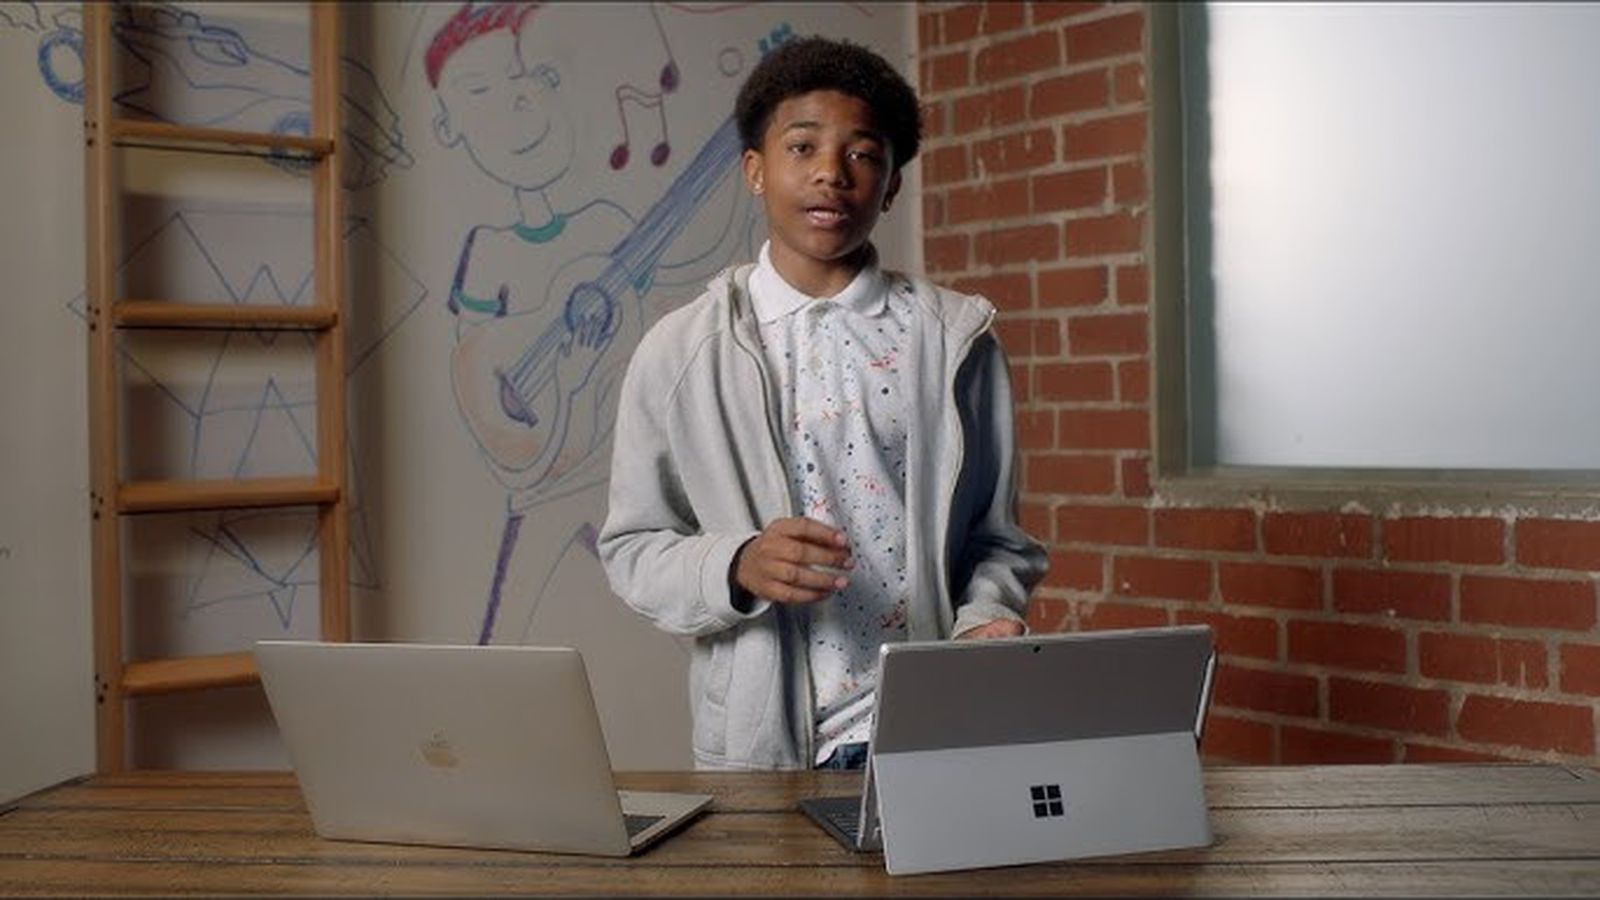 Microsoft touts Surface Pro 7 as the "Best Choice" on MacBook Pro in new ad